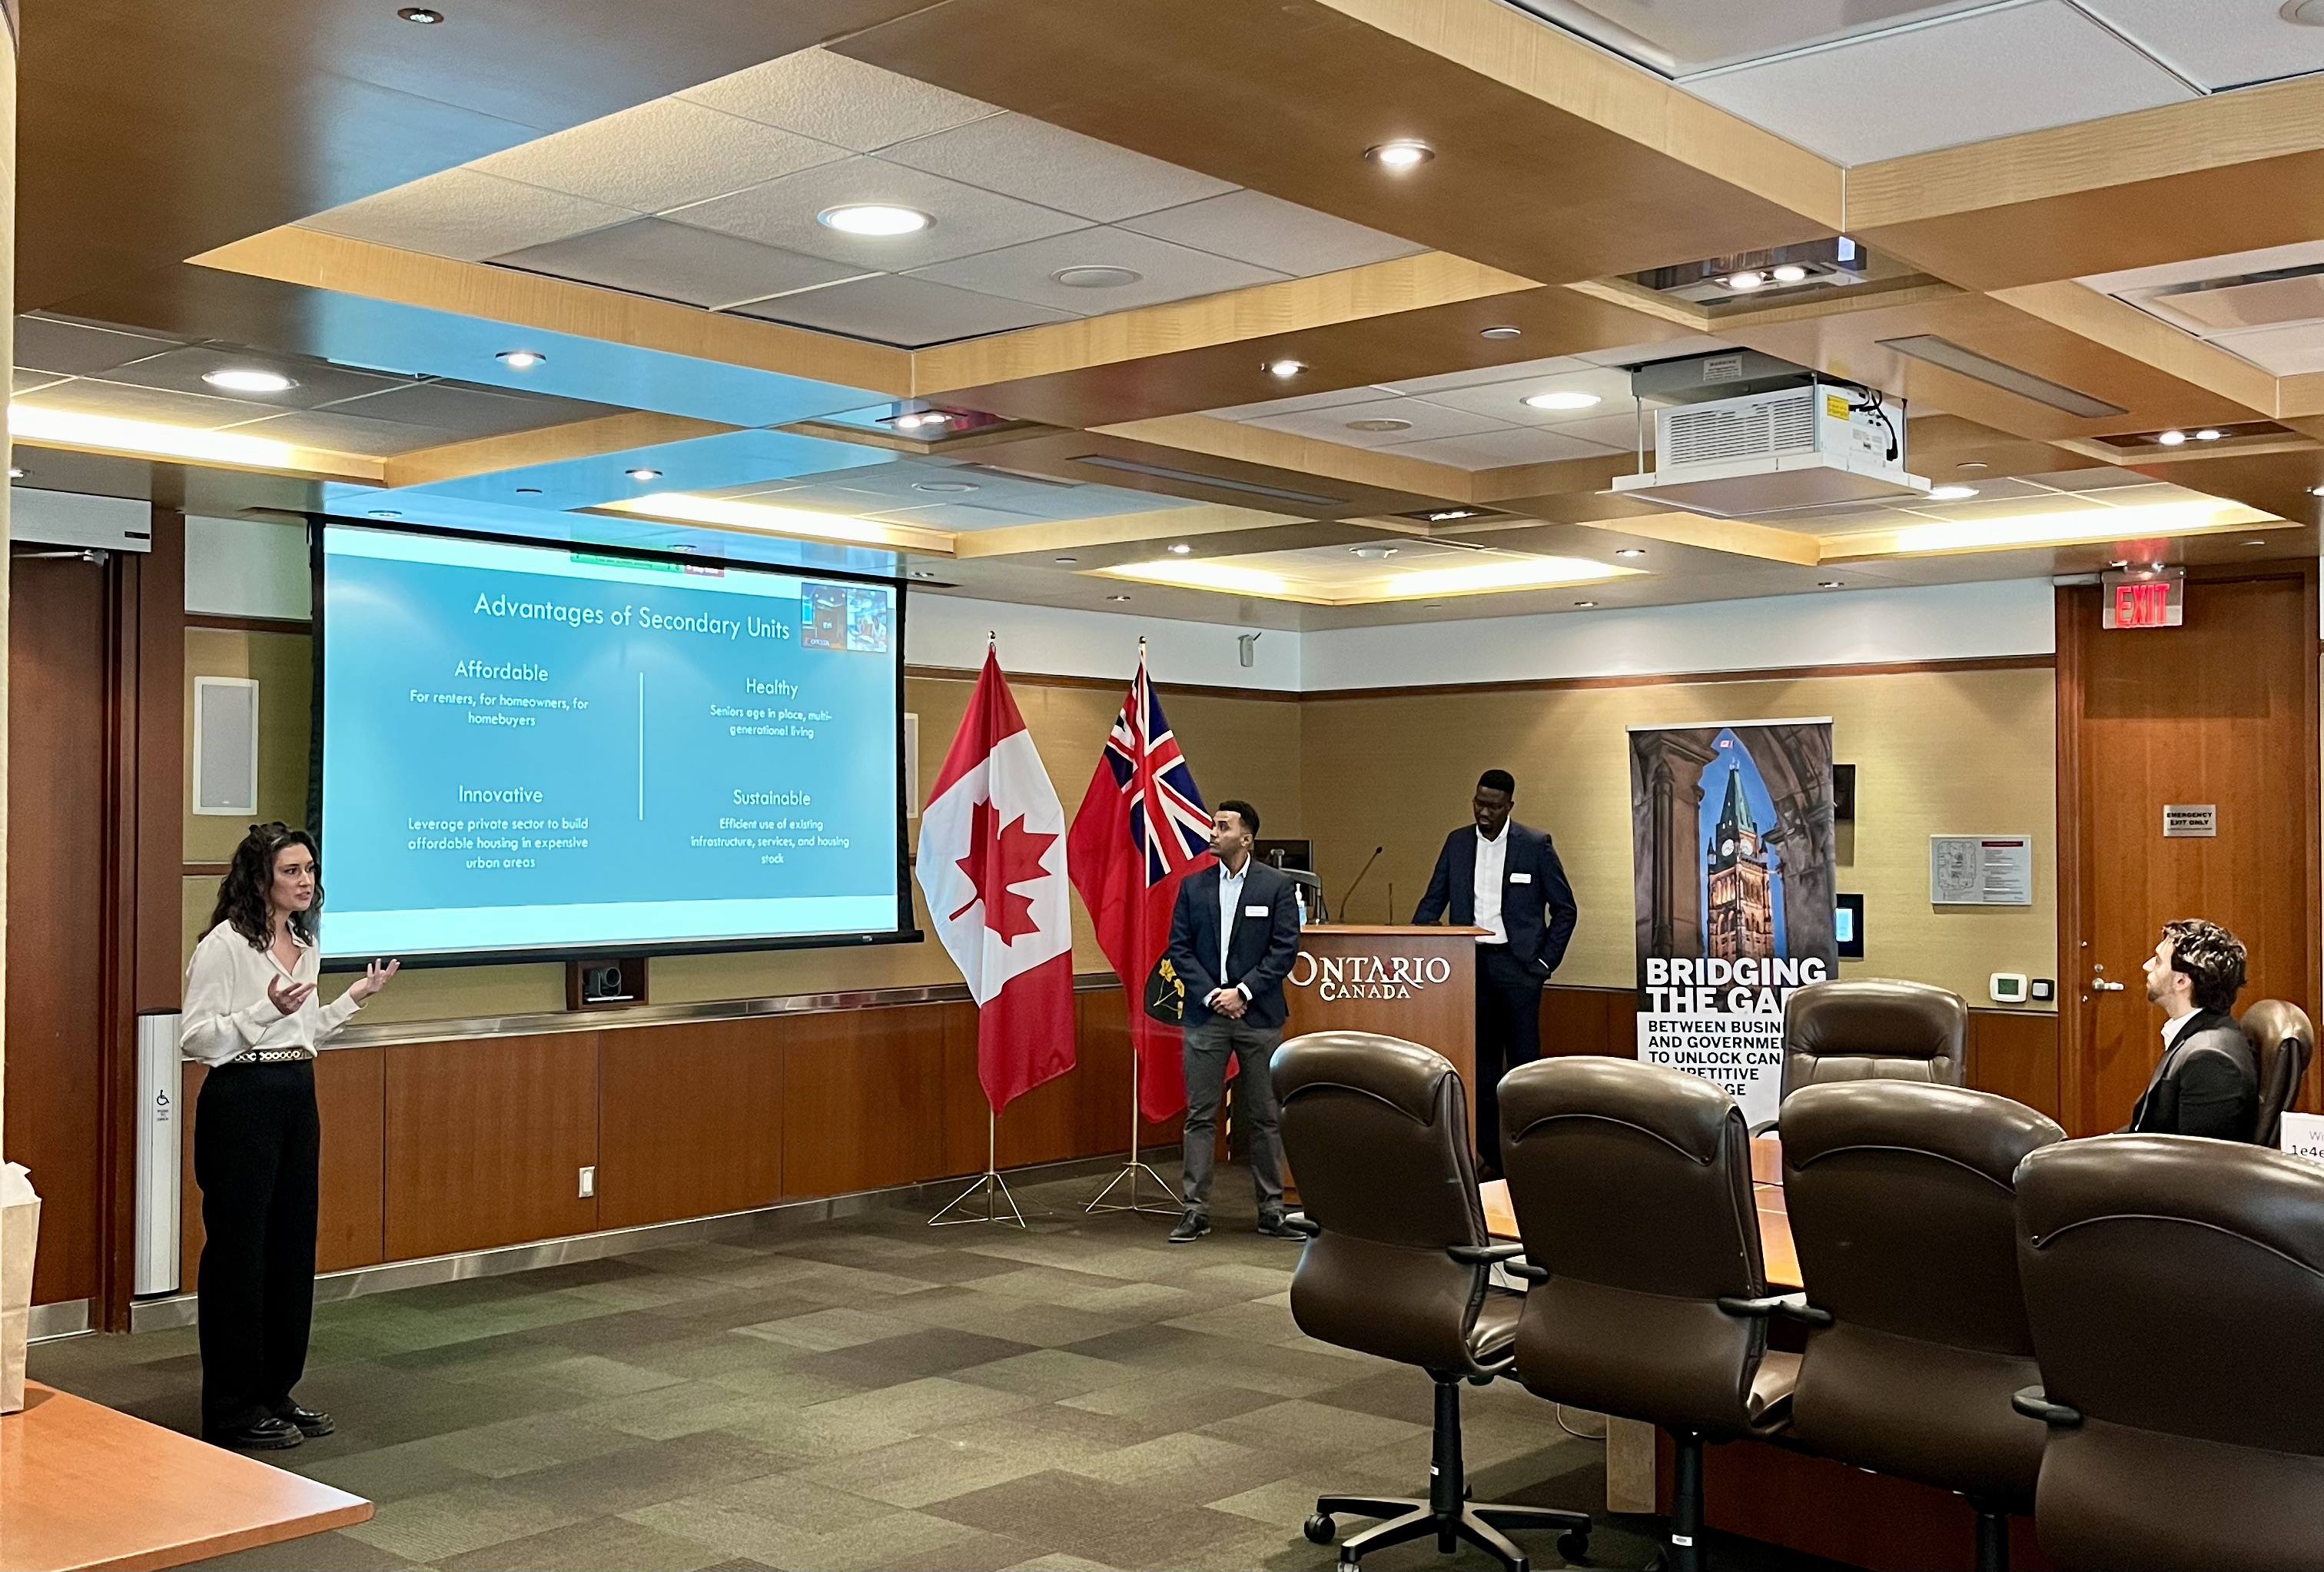 Three students standing at the front of a board room, one to the left of a drop down screen, the other two to the right. There is a podium with "Ontario Canada" written on the front.